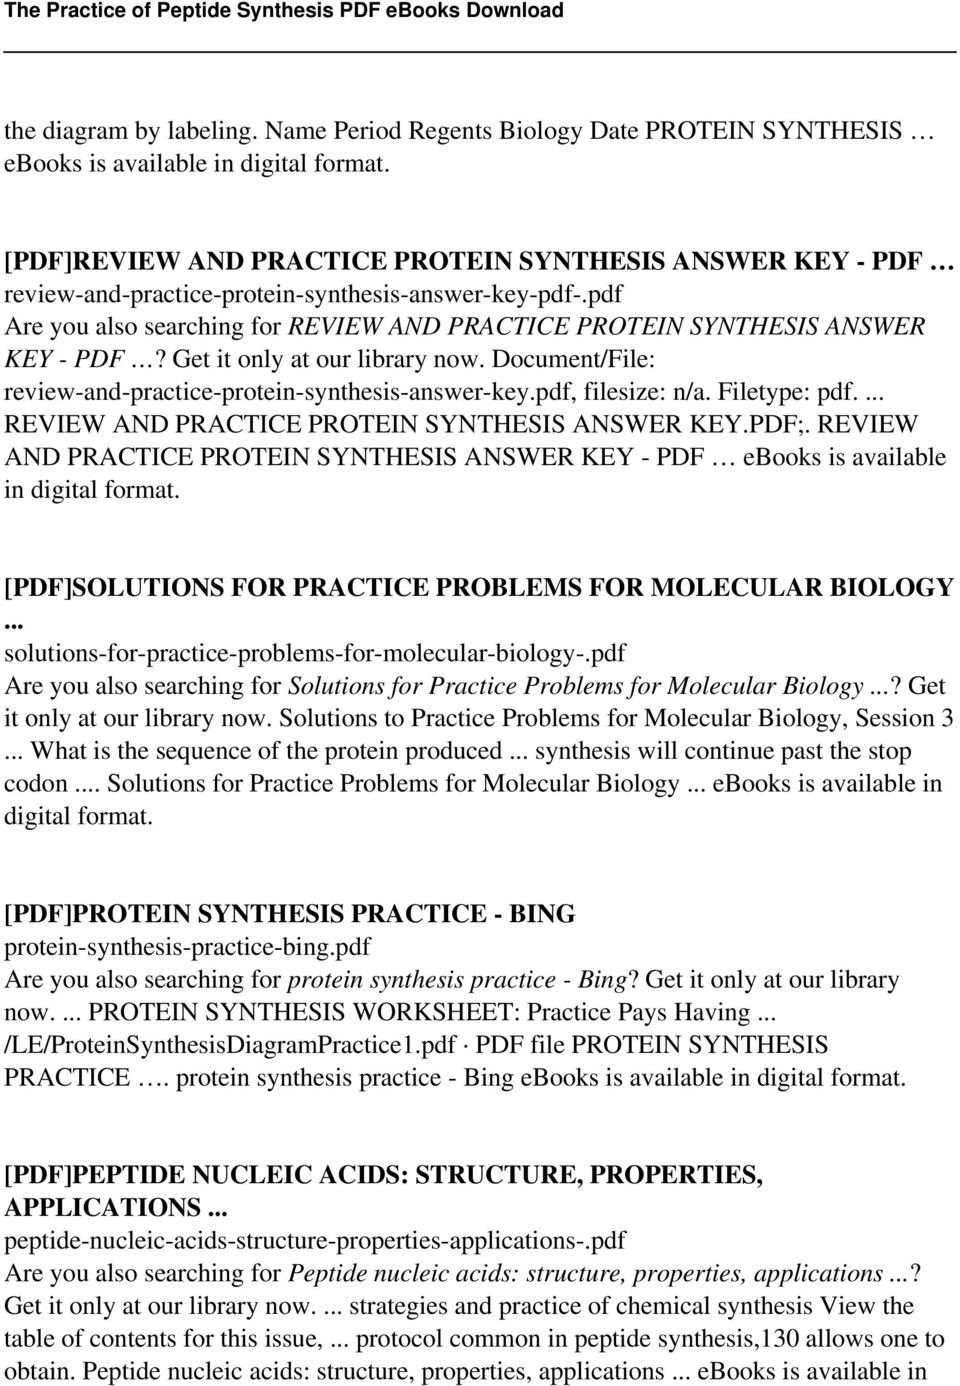 Protein Synthesis Practice Worksheet the Practice Of Peptide Synthesis Pdf Free Download